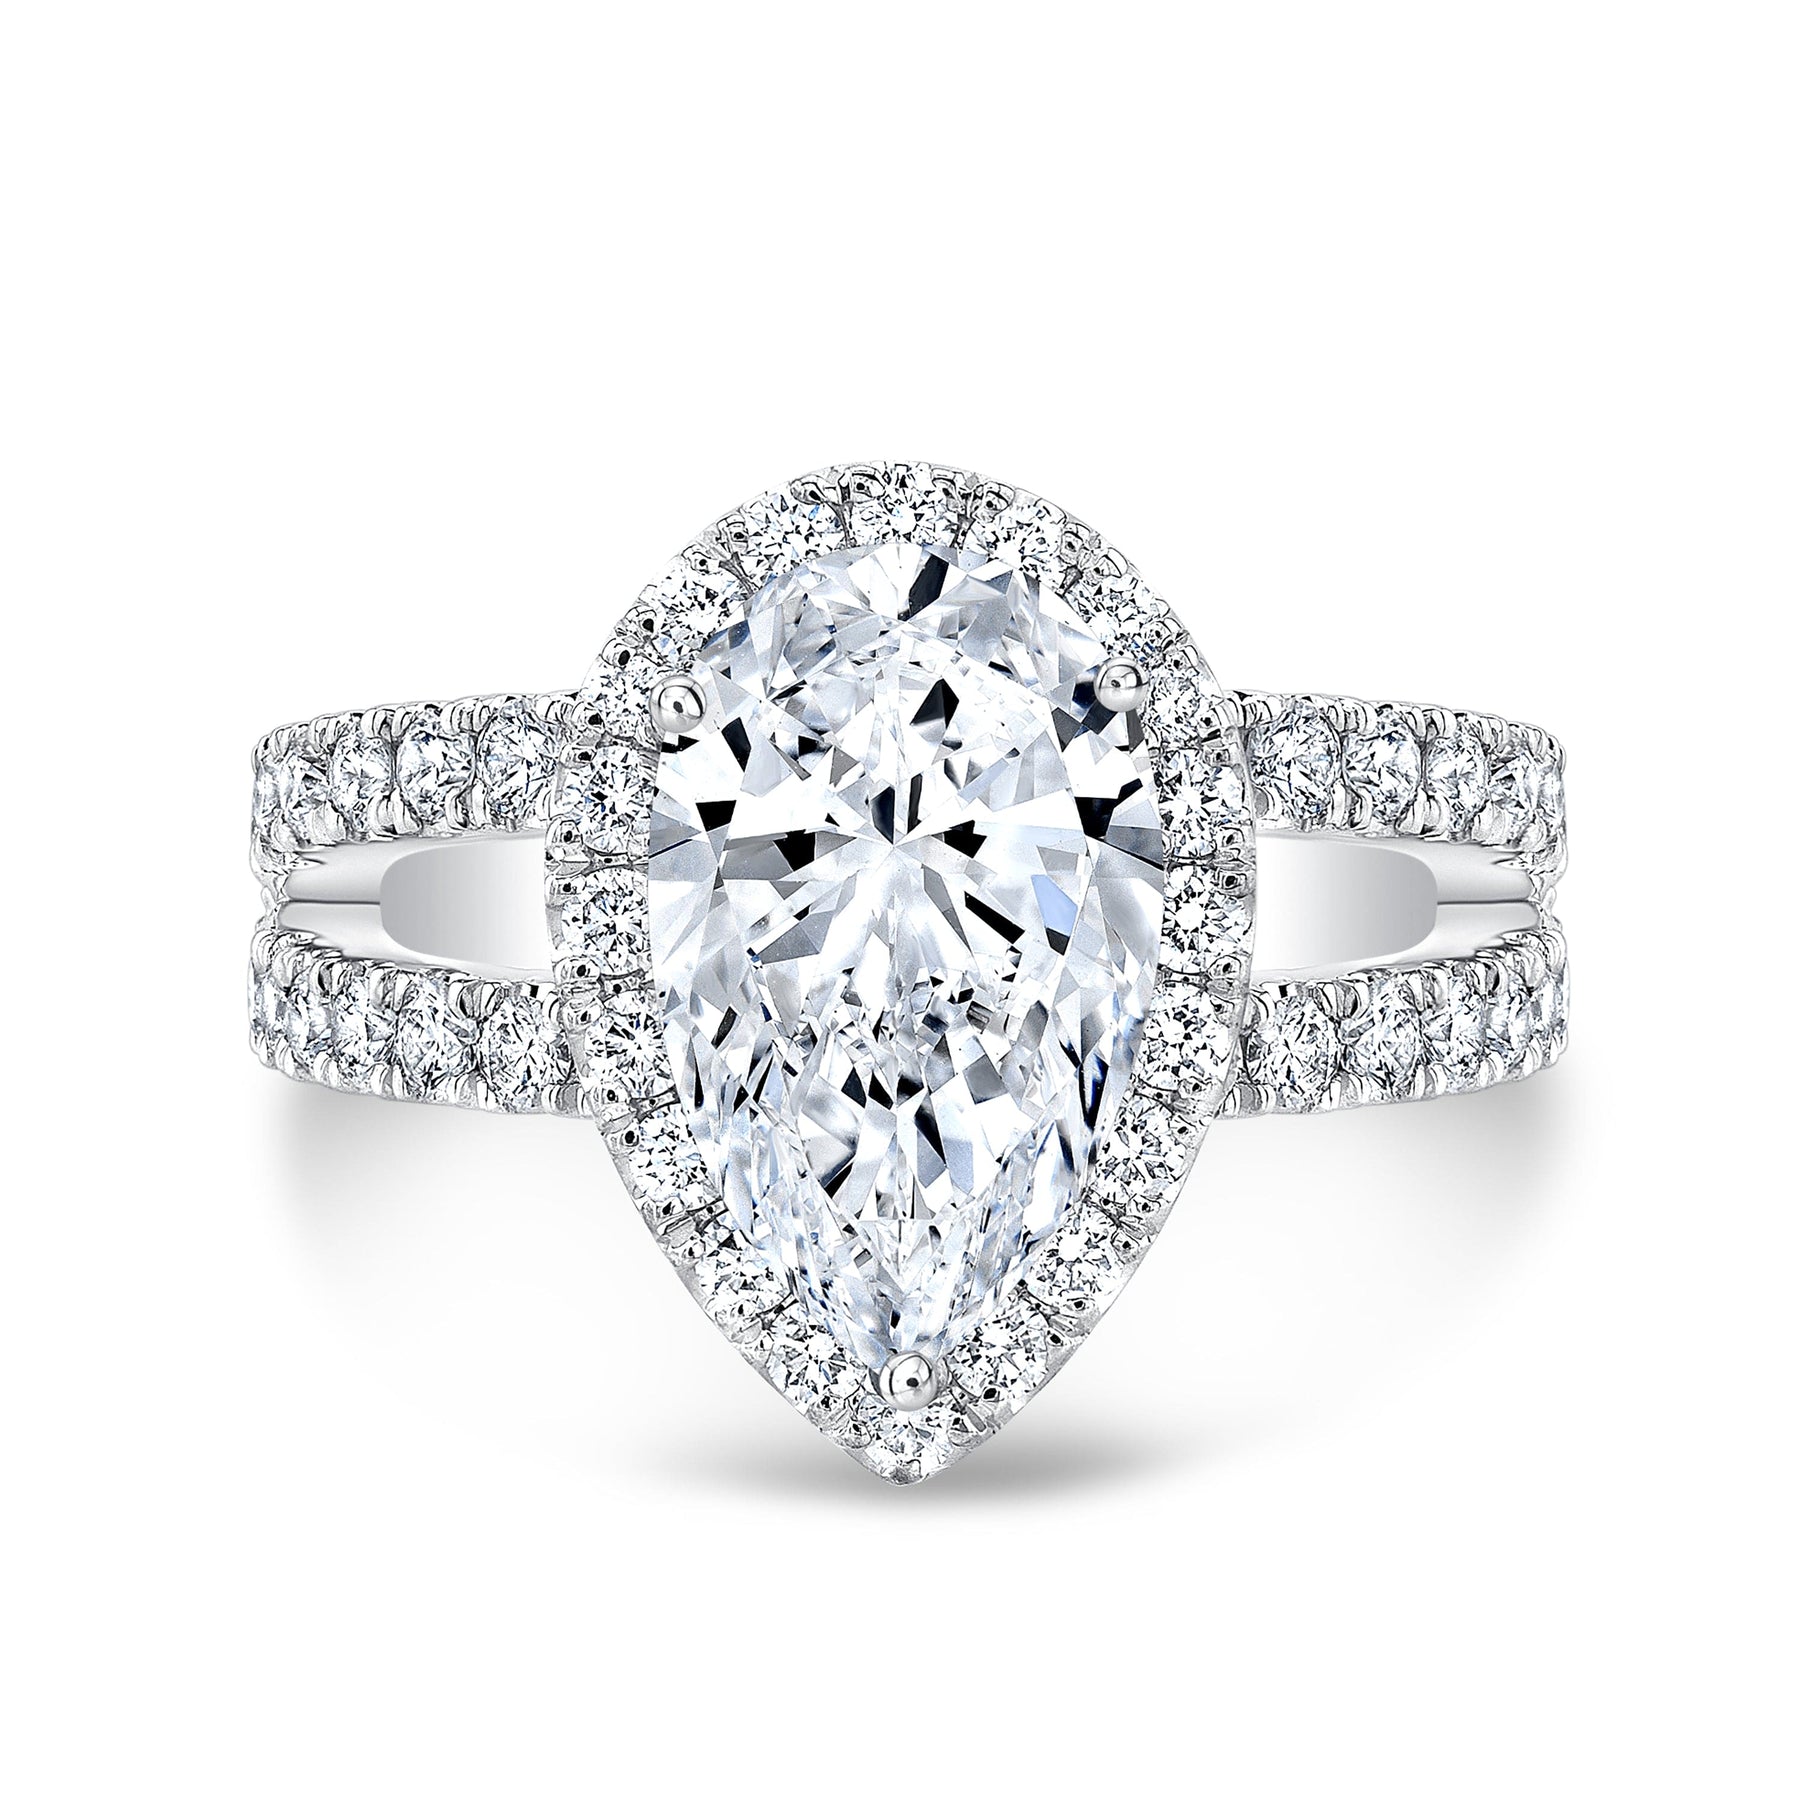 Pear shape engagement ring set with 3.25 ct center 100% natural